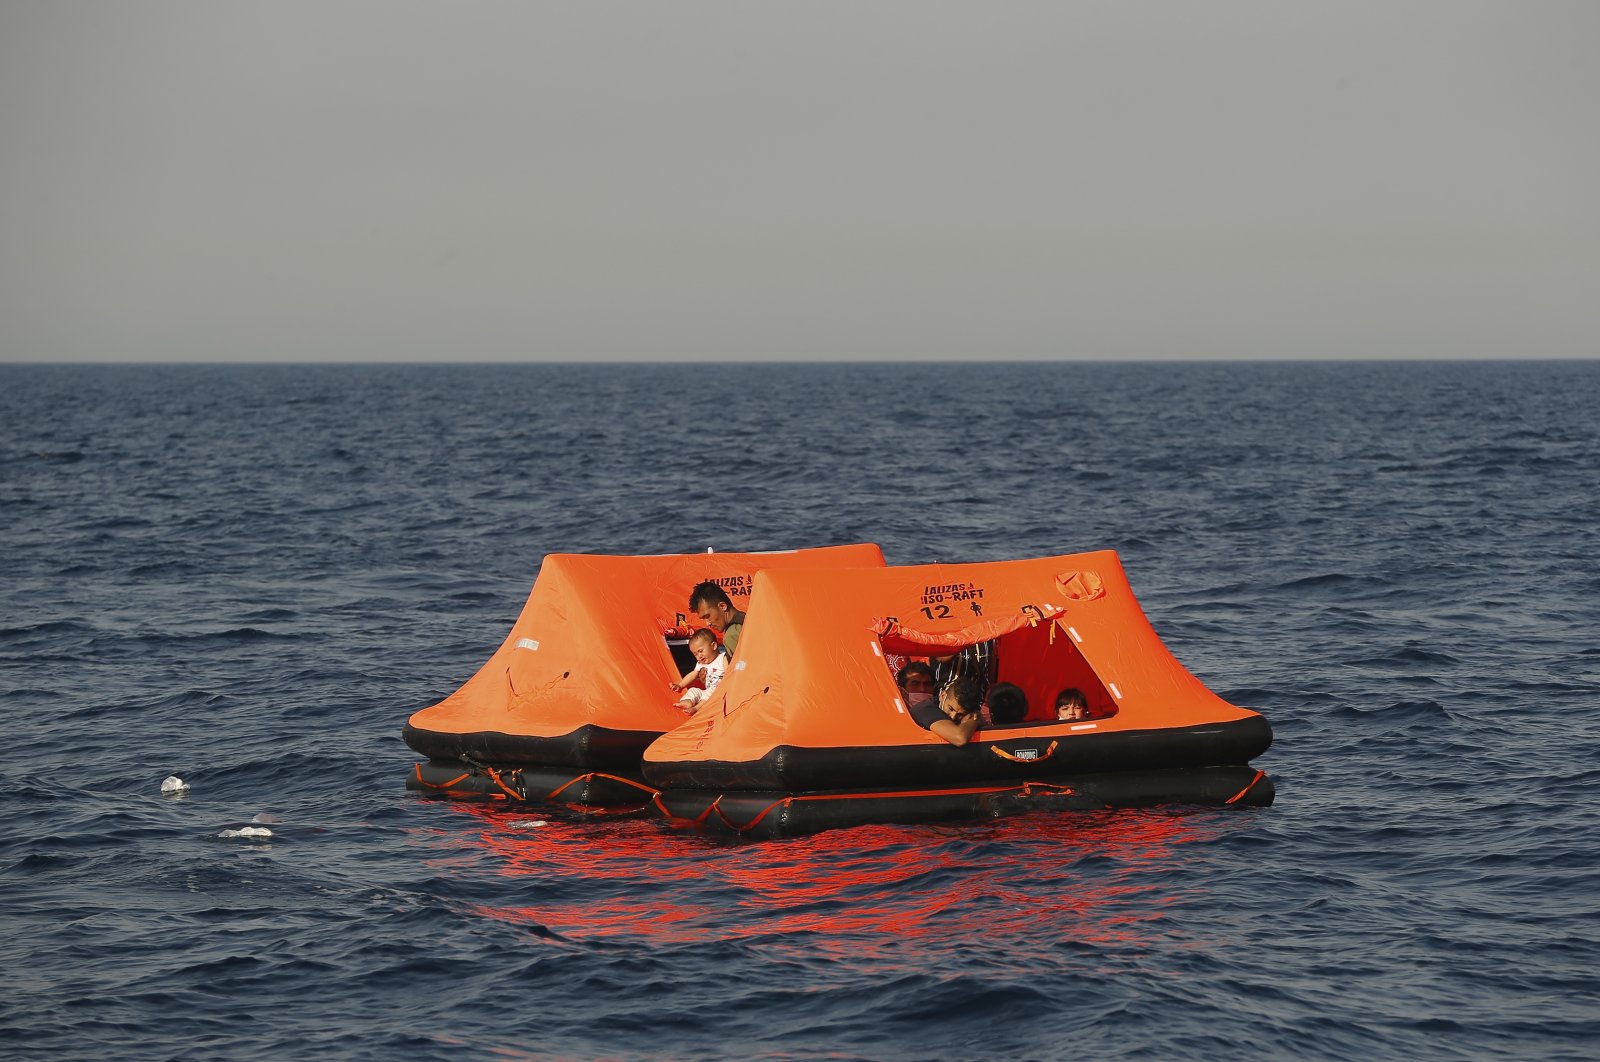 Afghan migrants watch from inside a life raft during a rescue operation by the Turkish coast guard, in the Aegean Sea, between Turkey and Greece, Saturday, Sept. 12, 2020. (AP Photo)